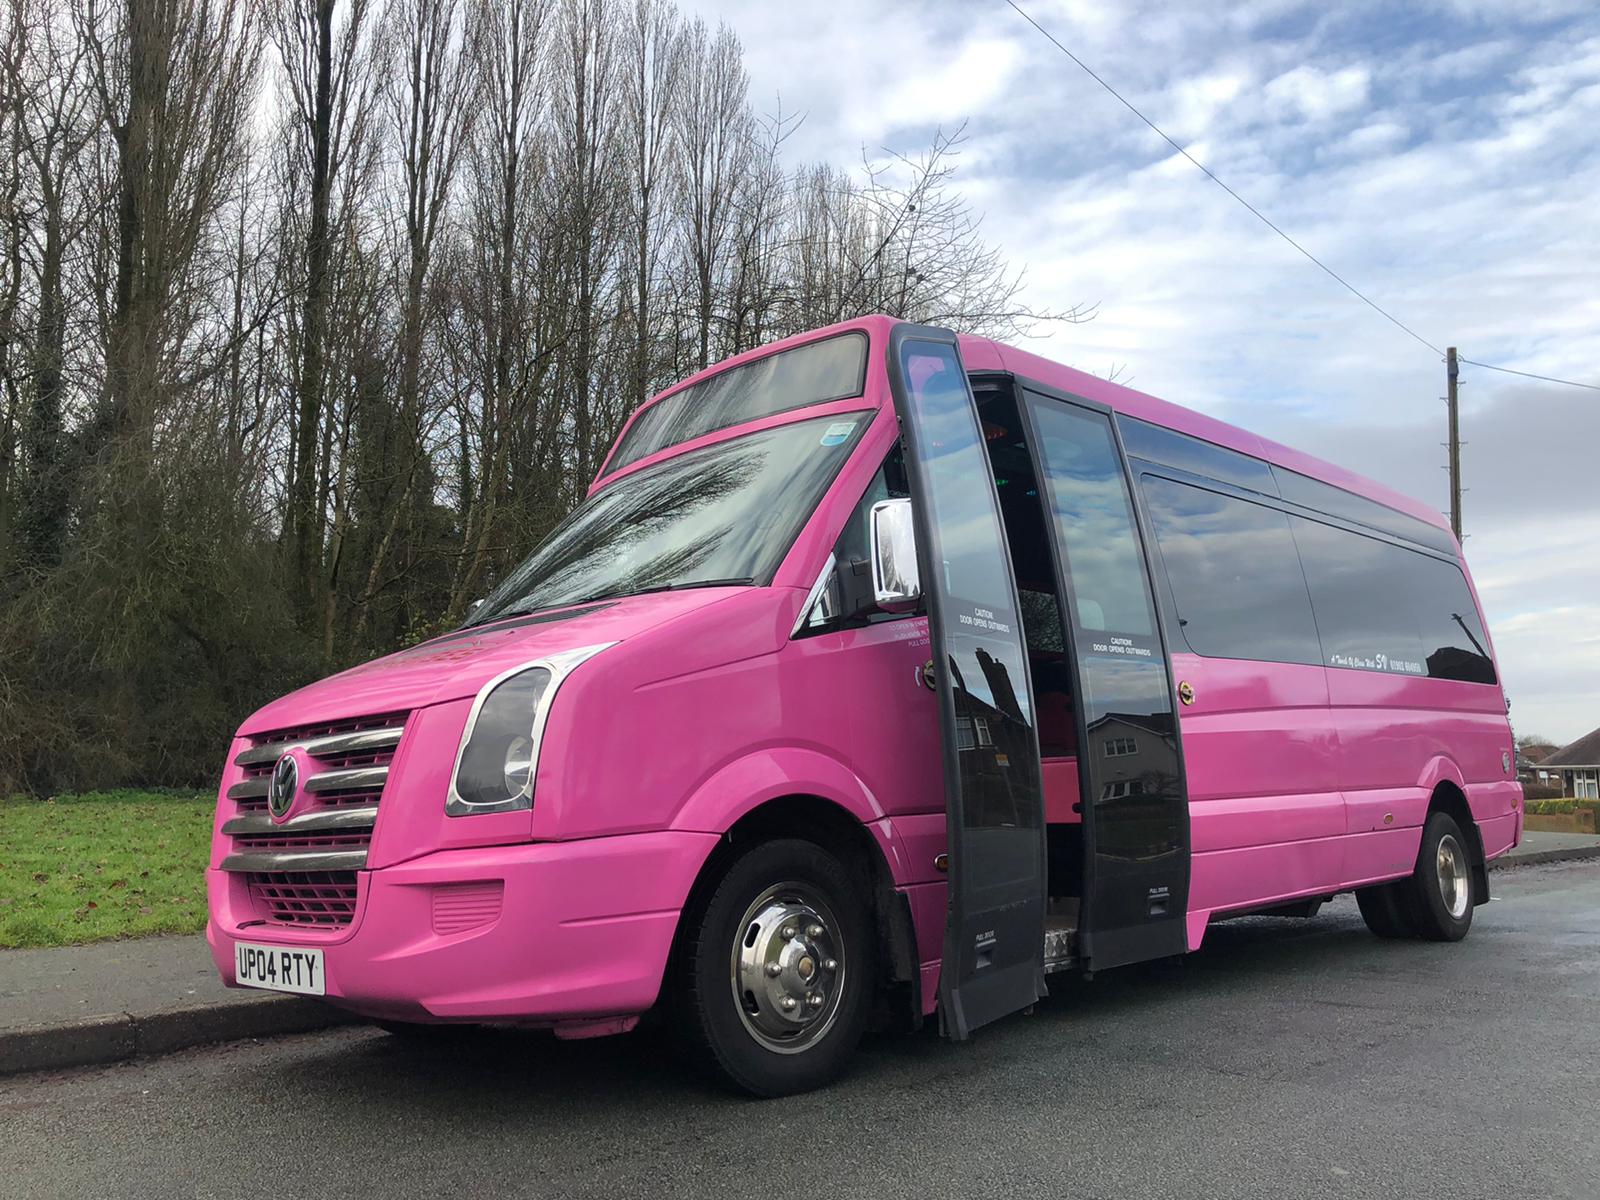 How to Compare Party Bus Hire Prices in the UK and Get the Best Deal